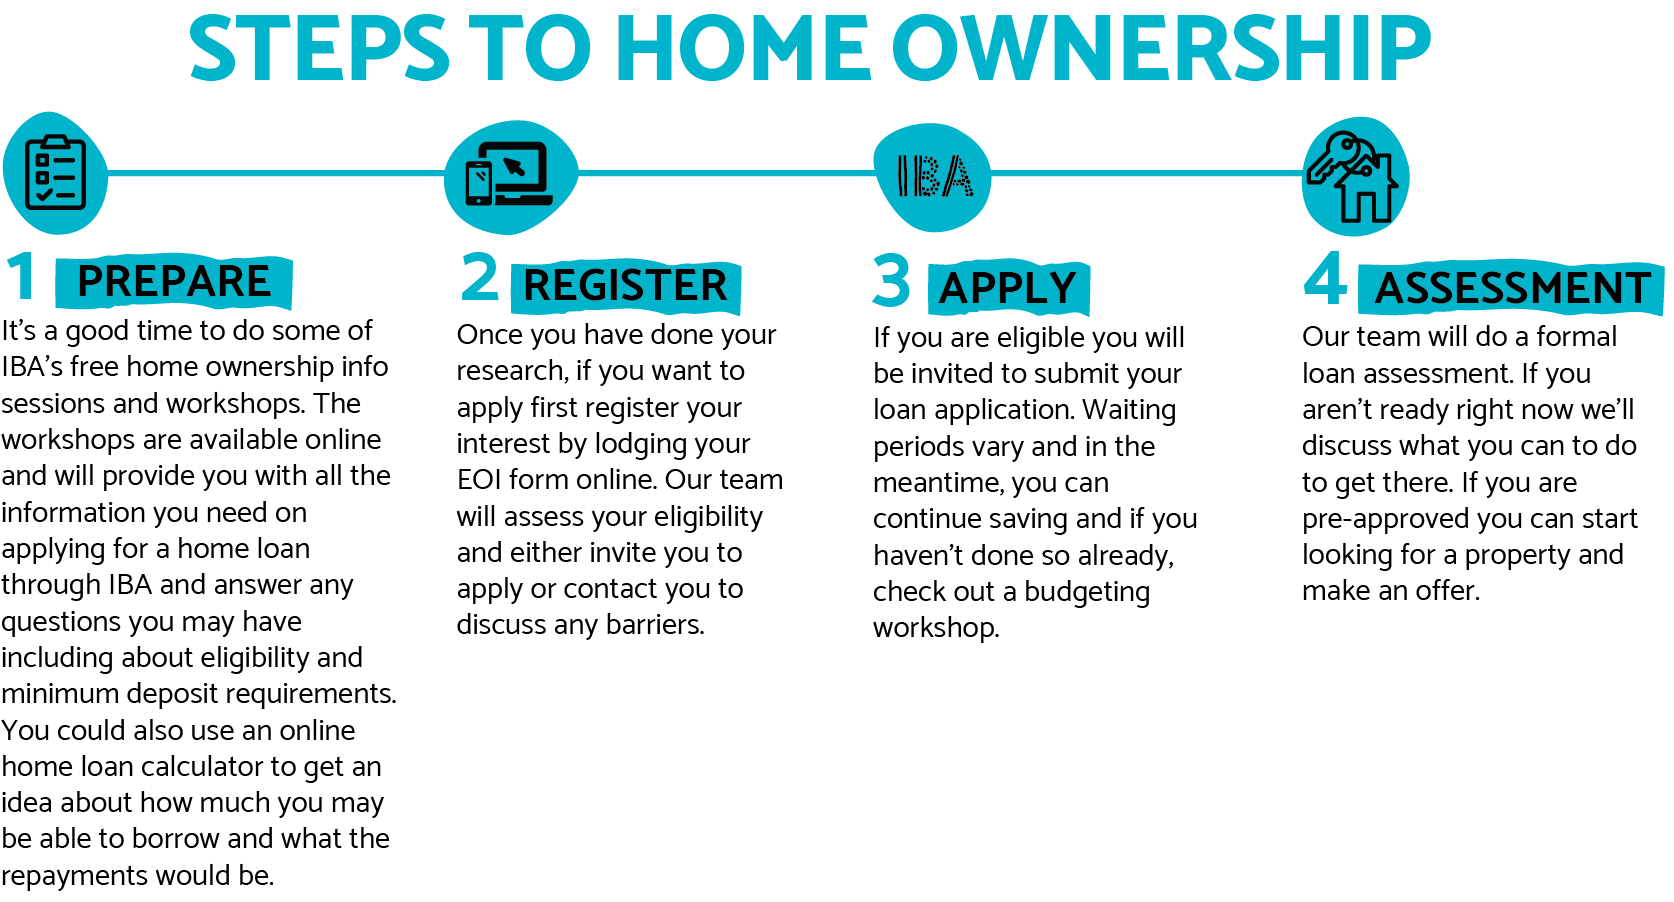 Diagram showing four steps to home ownership - Prepare, Register, Apply, Assessment